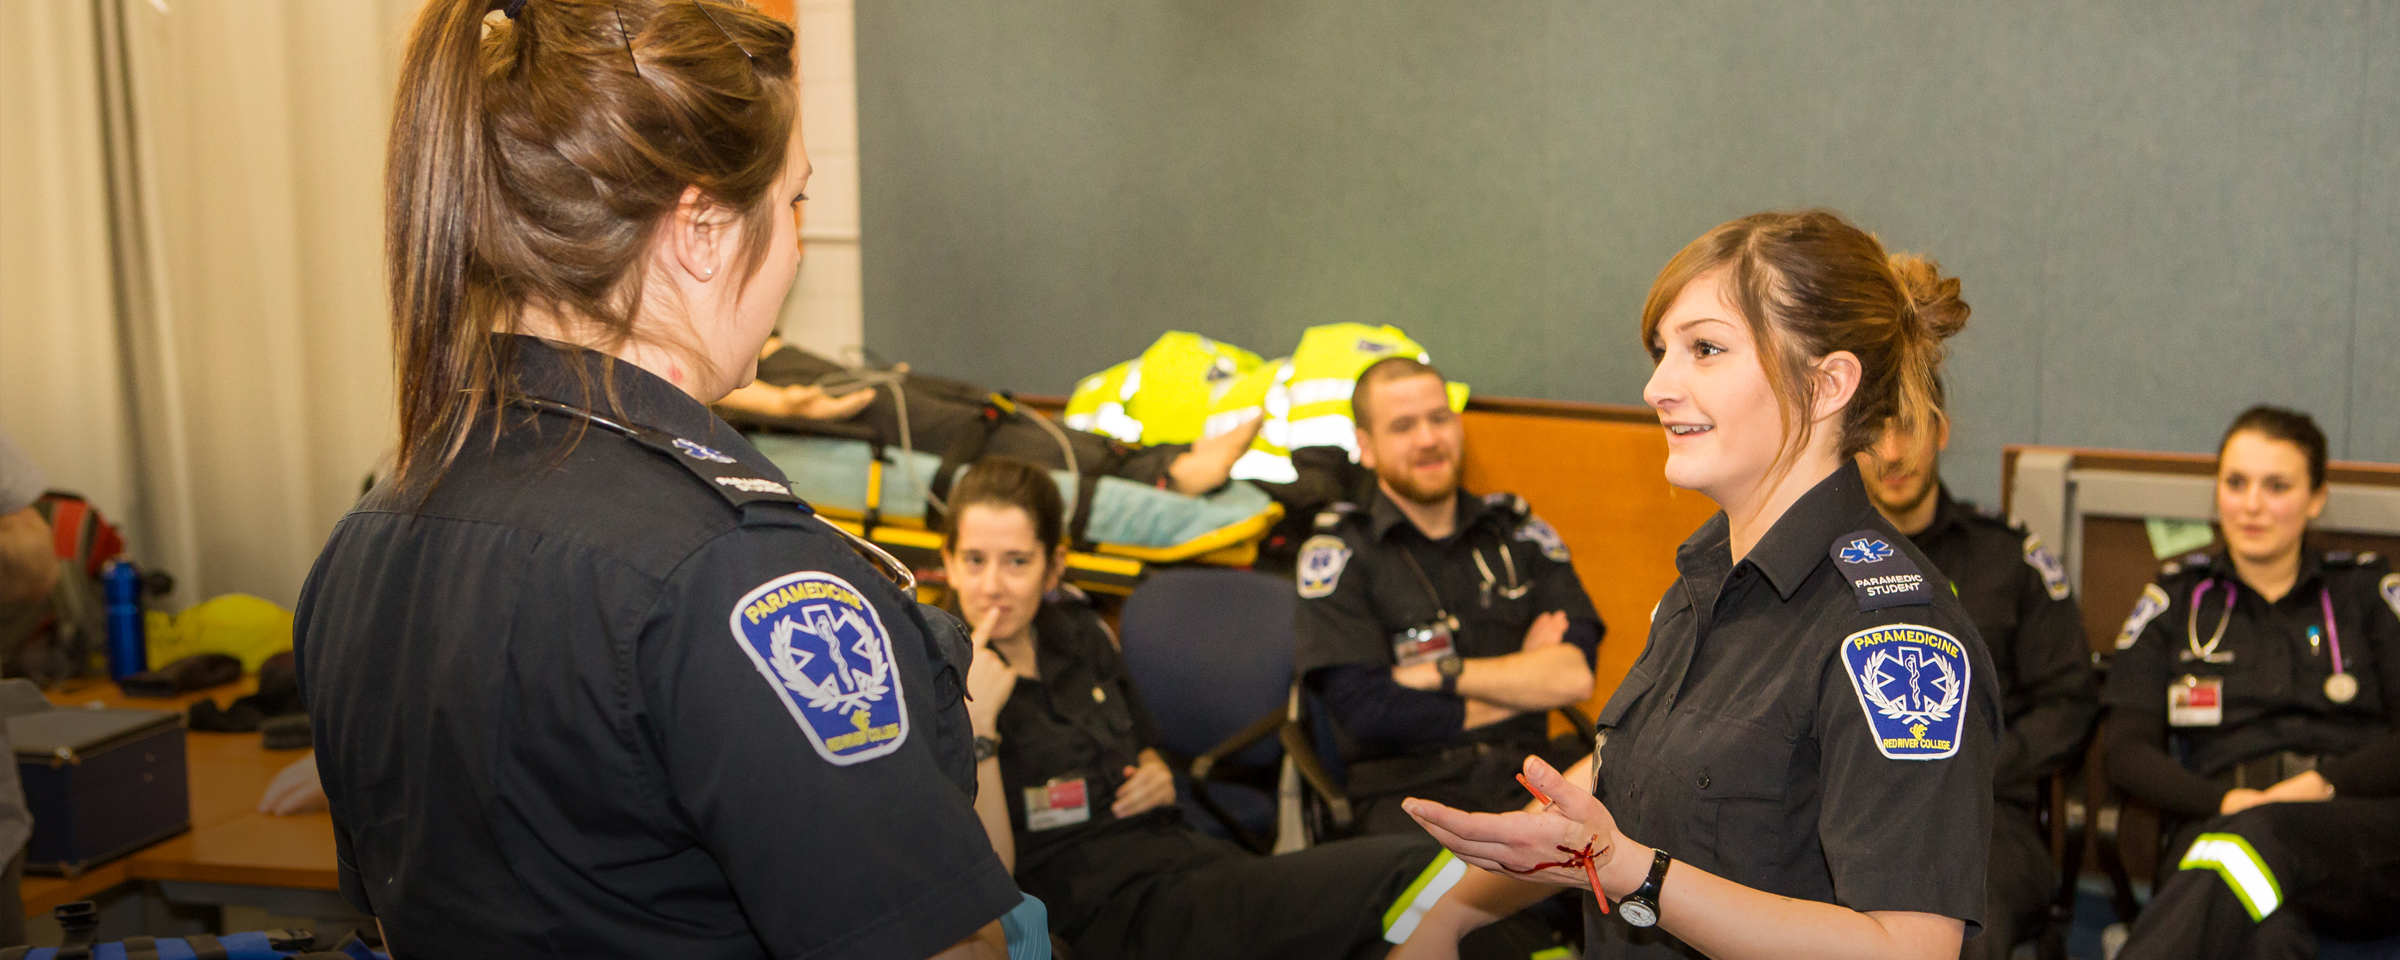 Paramedicine students talking to each other in classroom